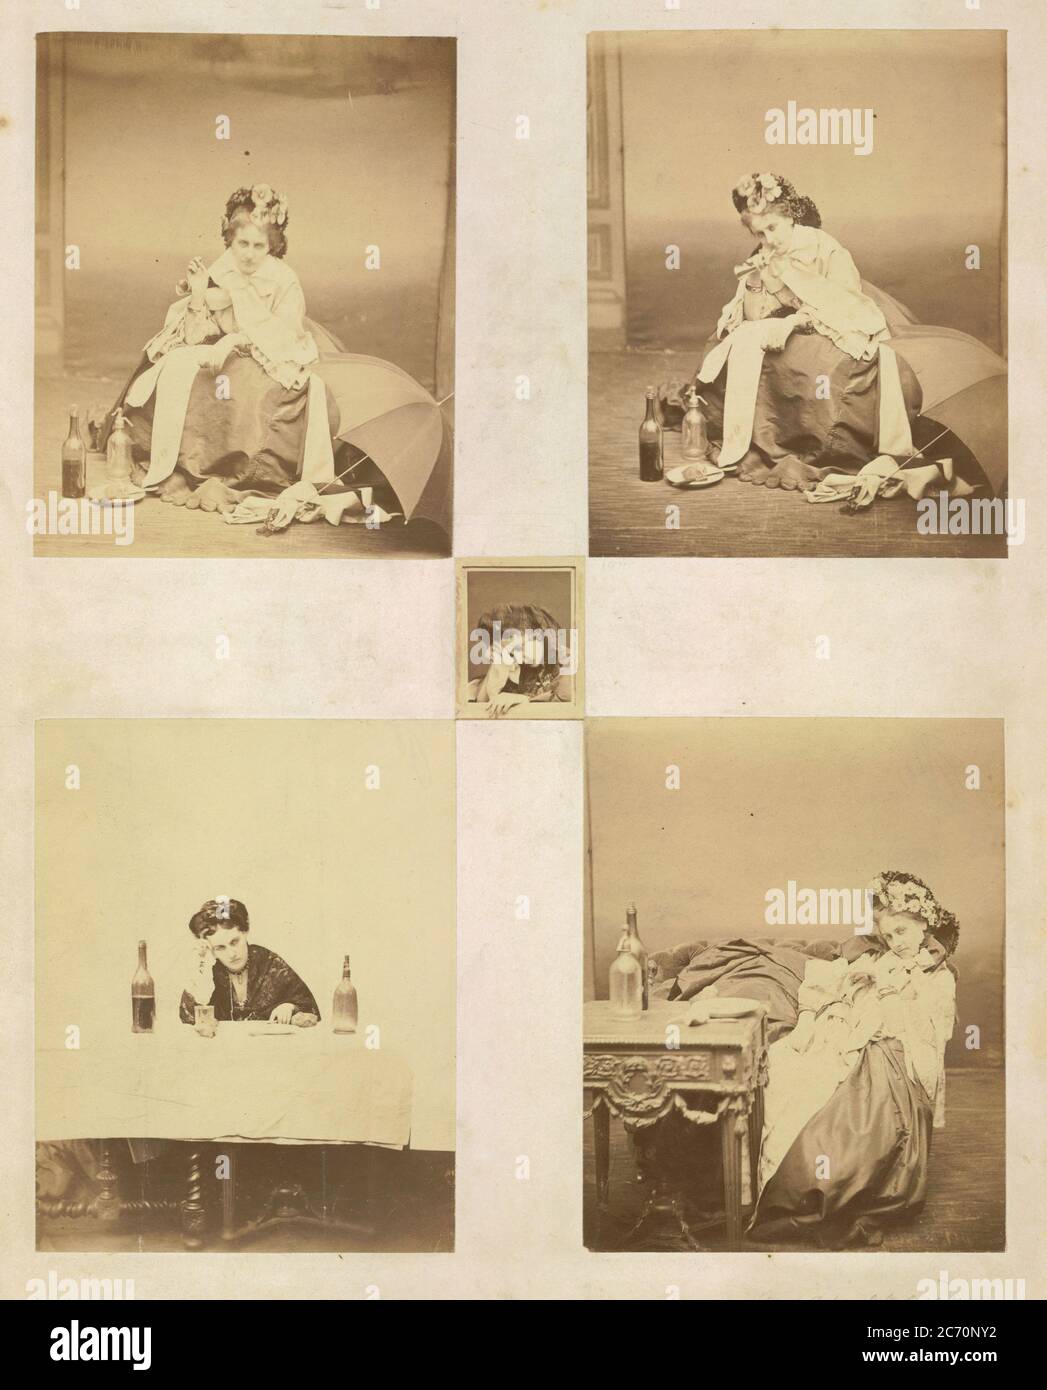 [Album page with ten photographs of La Comtesse mounted recto and verso], 1861-67. Top left: [La Comtesse with Horn, Umbrella and Bottles]; top right: [La Comtesse Blowing Horn]; center: [La Comtesse &quot;in despair&quot; with Kerchief to Face]; bottom left: [La Comtesse at Table with Bottle on Either Side]; bottom right: [La Comtesse in Flowered Hat Seated at Table] Stock Photo